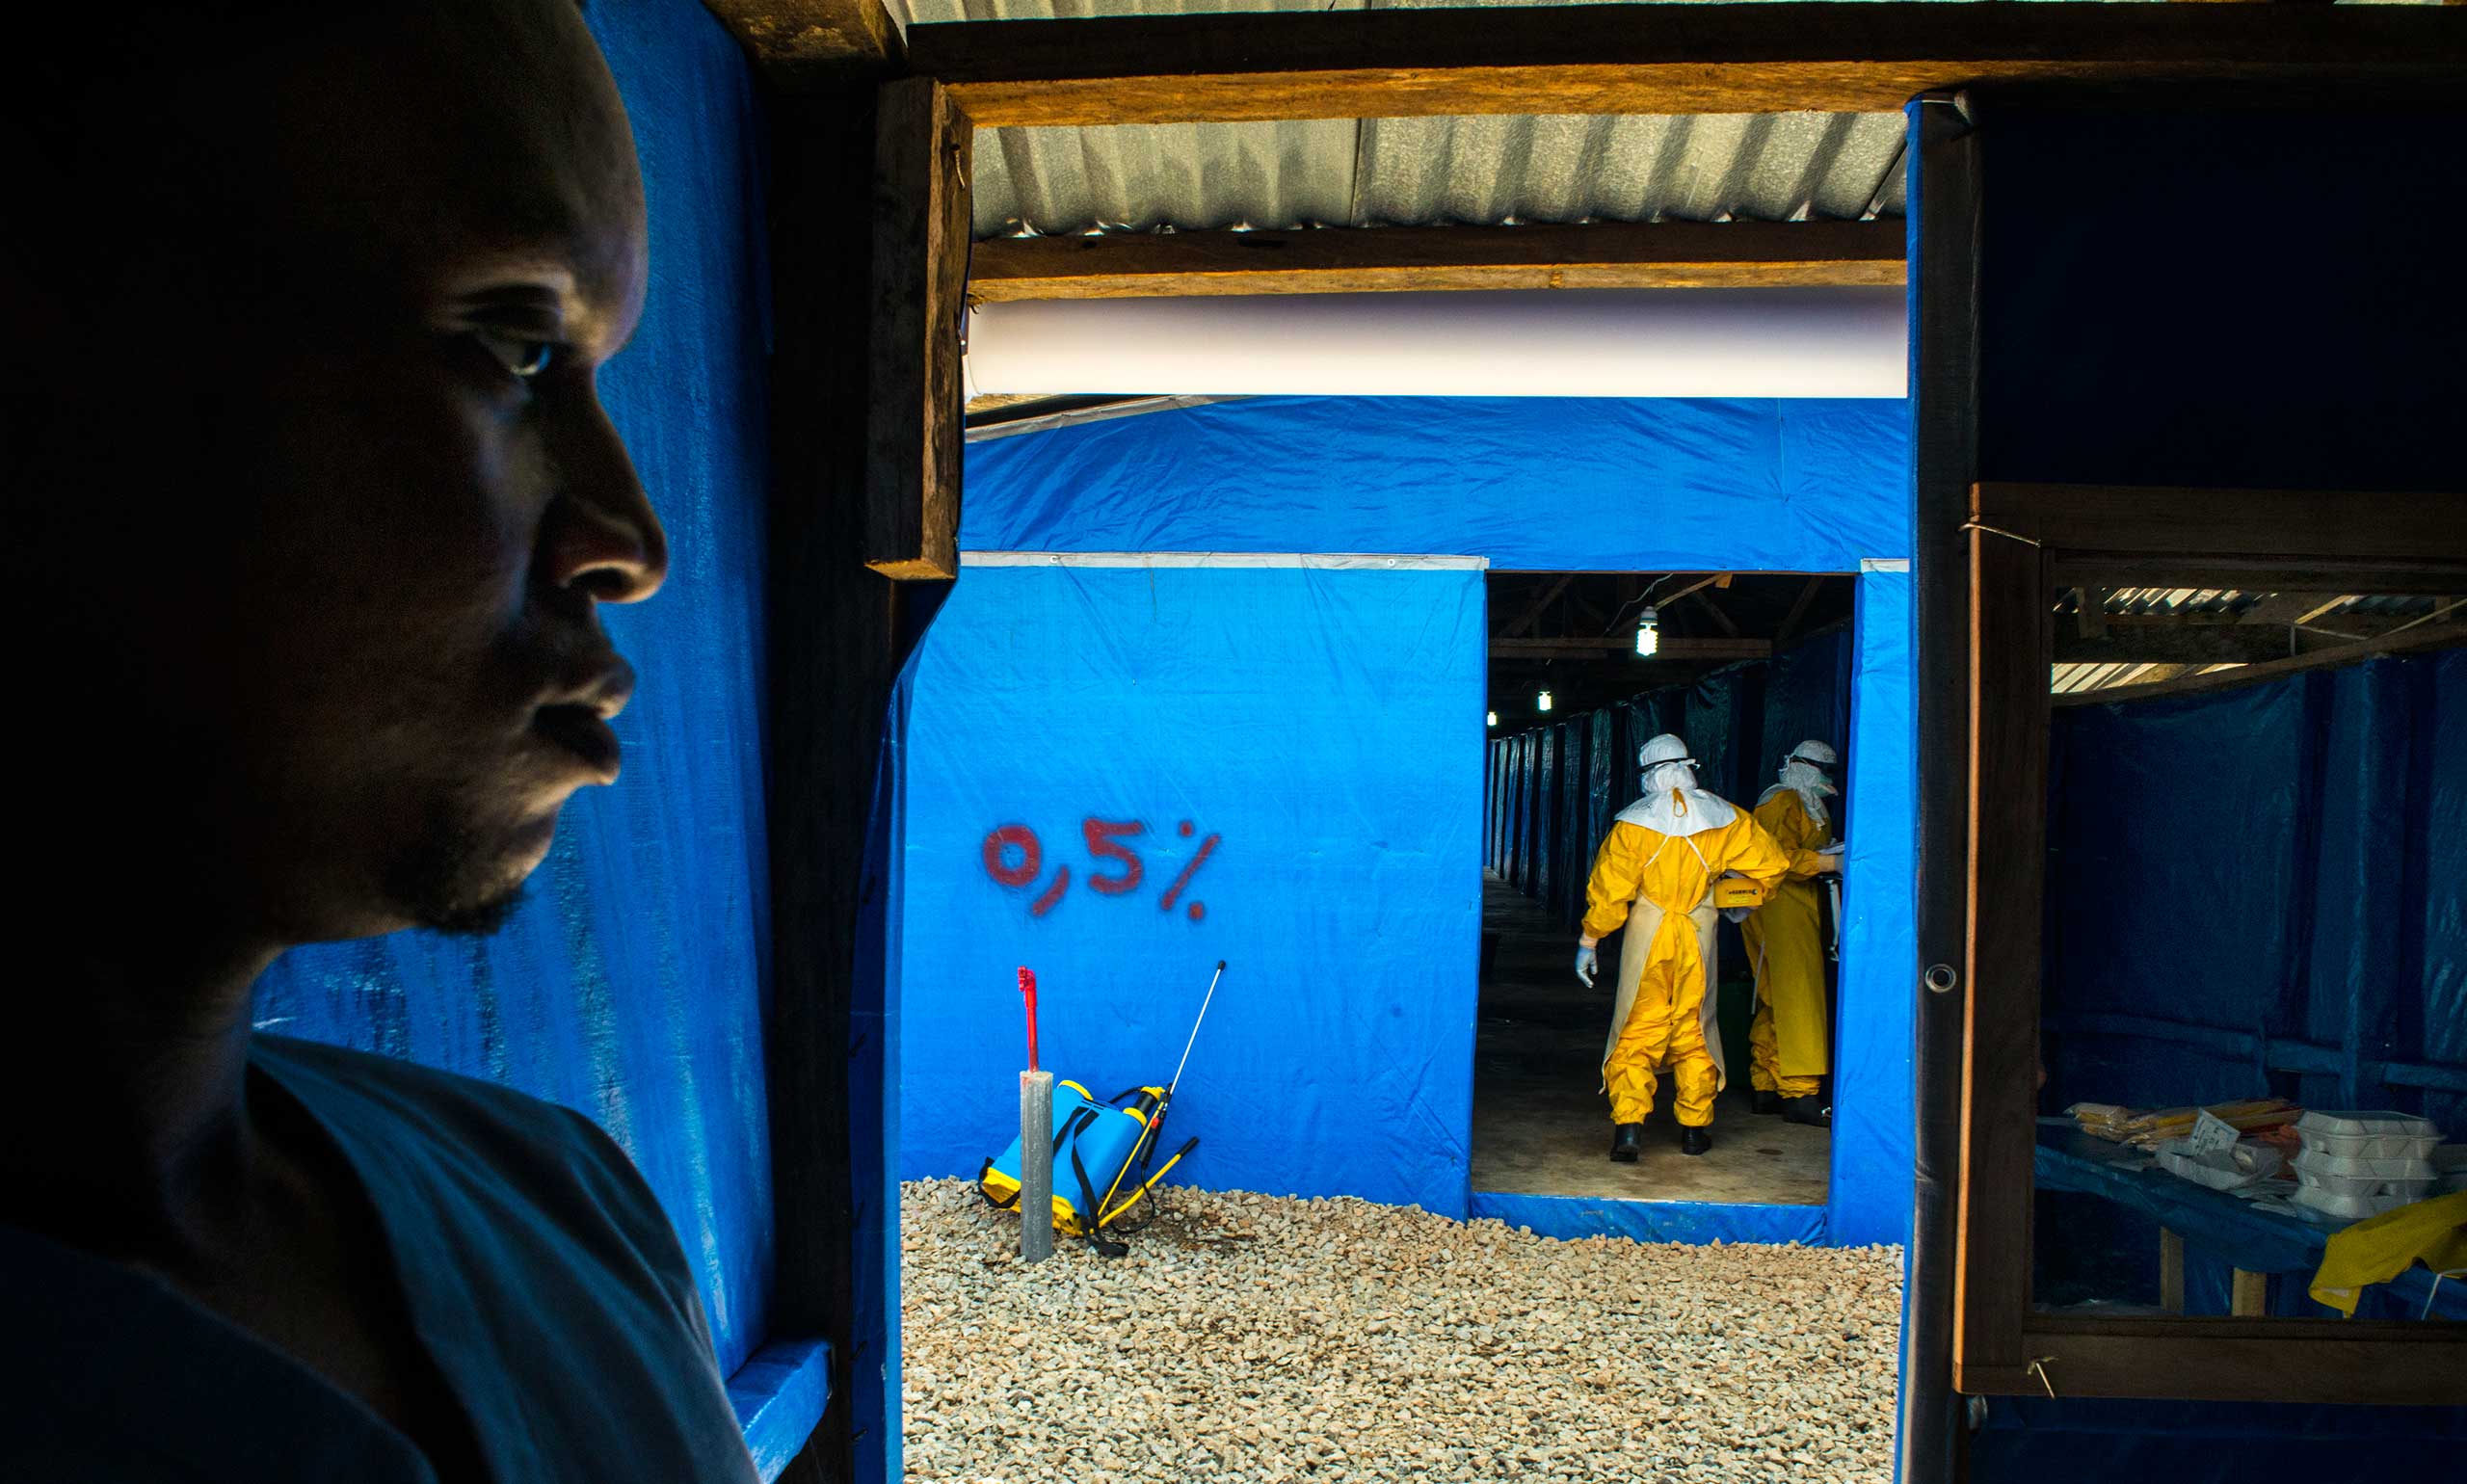 Moses Tarkulah stands by as colleagues enter the suspected Eloba case ward Bong County Ebola Treatment Unit, Sept. 16, 2014.